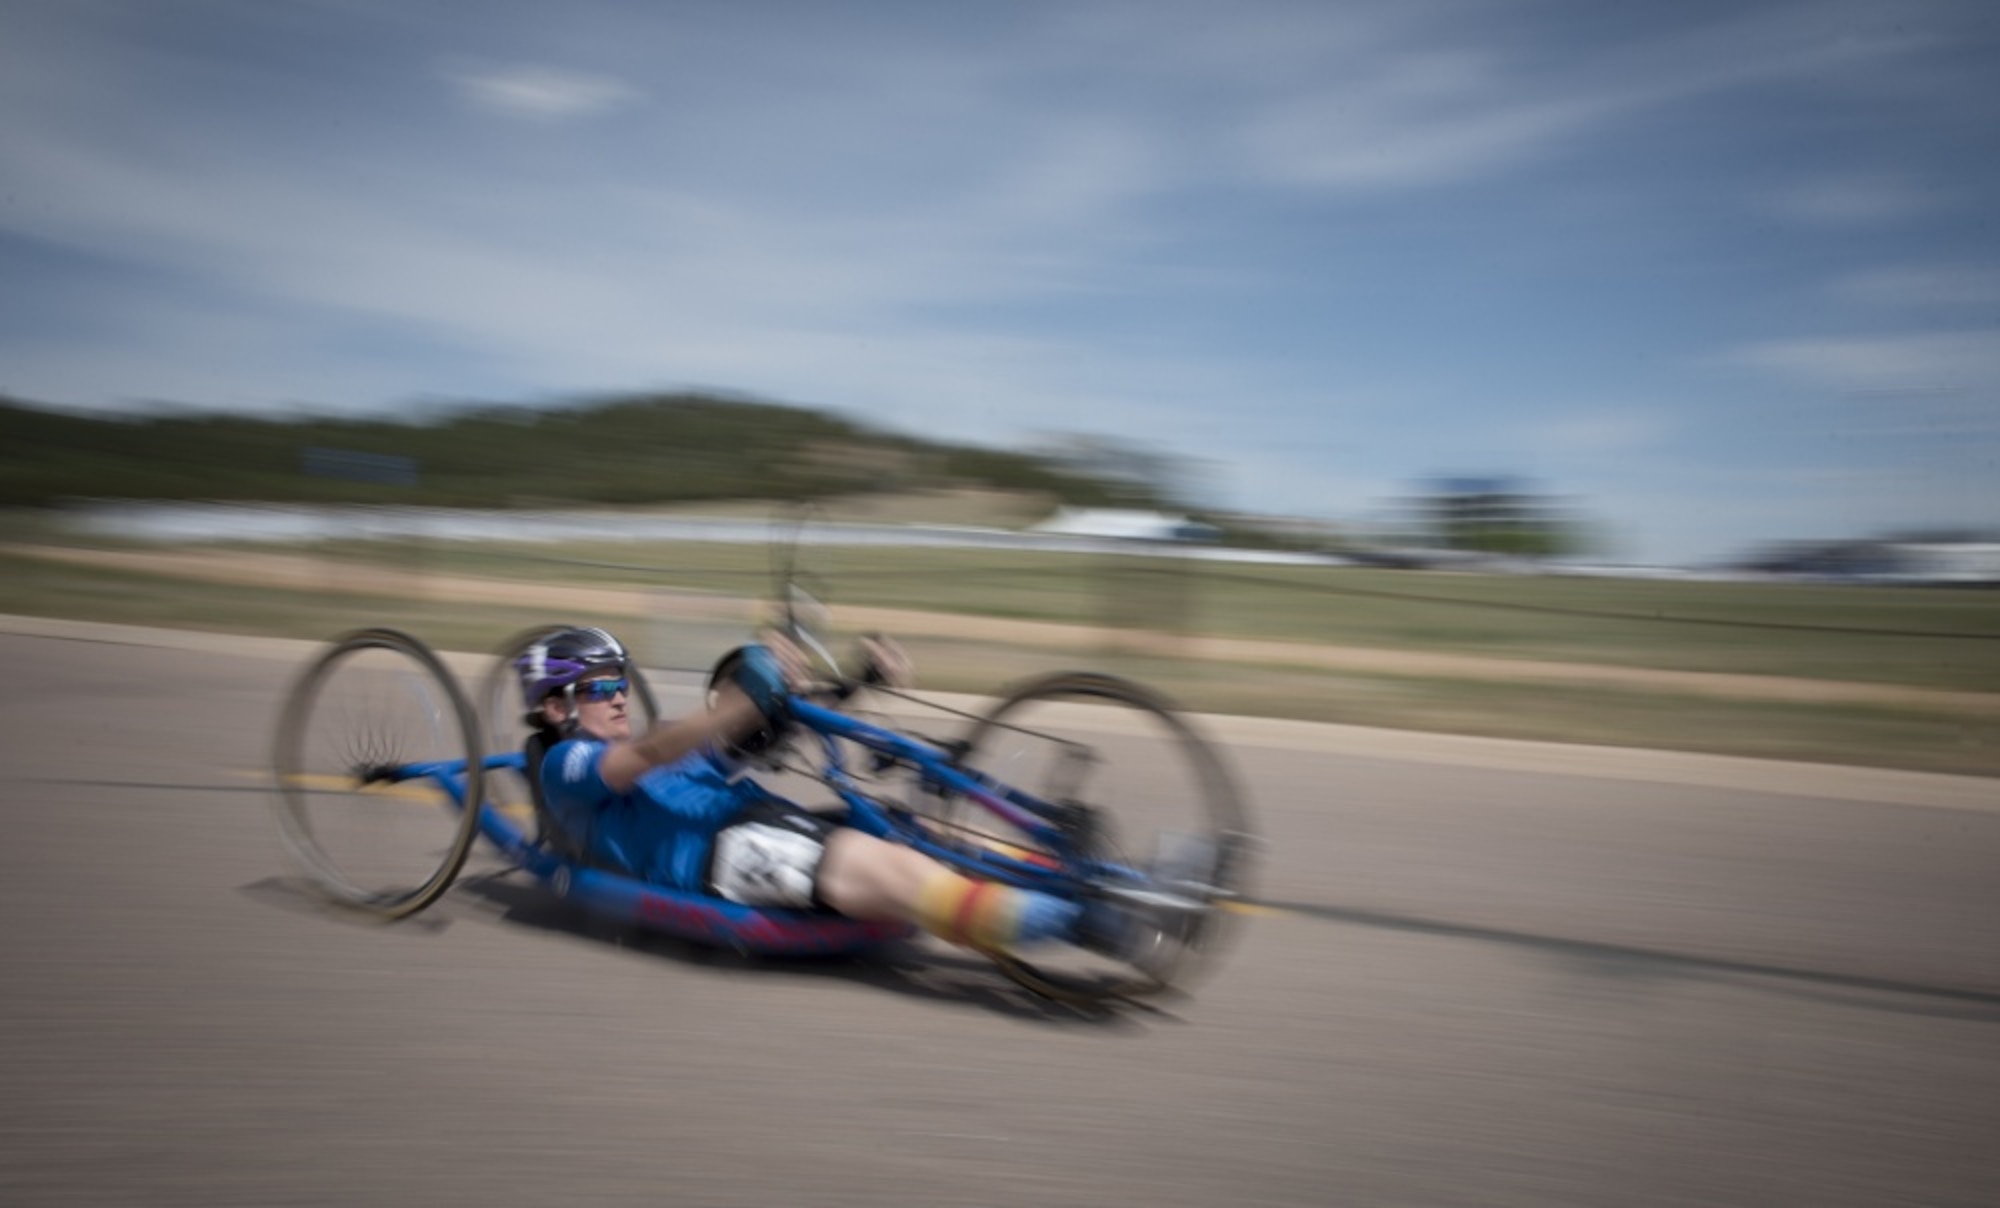 Master Sgt. Lisa Goad, Department of Defense Warrior Games athlete and Team Air Force member, competes in the cycling competition at the U.S. Air Force Academy, Colorado Springs, Colo., June 6, 2018. Competing in the Games are service members and veterans with upper-body and lower-body limitations, spinal cord injuries, traumatic brain injuries, visual impairments, serious illnesses, and post-traumatic stress. Each of the Air Force’s 39 participating athletes will compete in one or more of 11 sports including archery, cycling, shooting, sitting volleyball, swimming, track, field, wheelchair basketball, indoor rowing, powerlifting, and time-trial cycling. (U.S. Air Force photo by Senior Airman Dennis Hoffman)